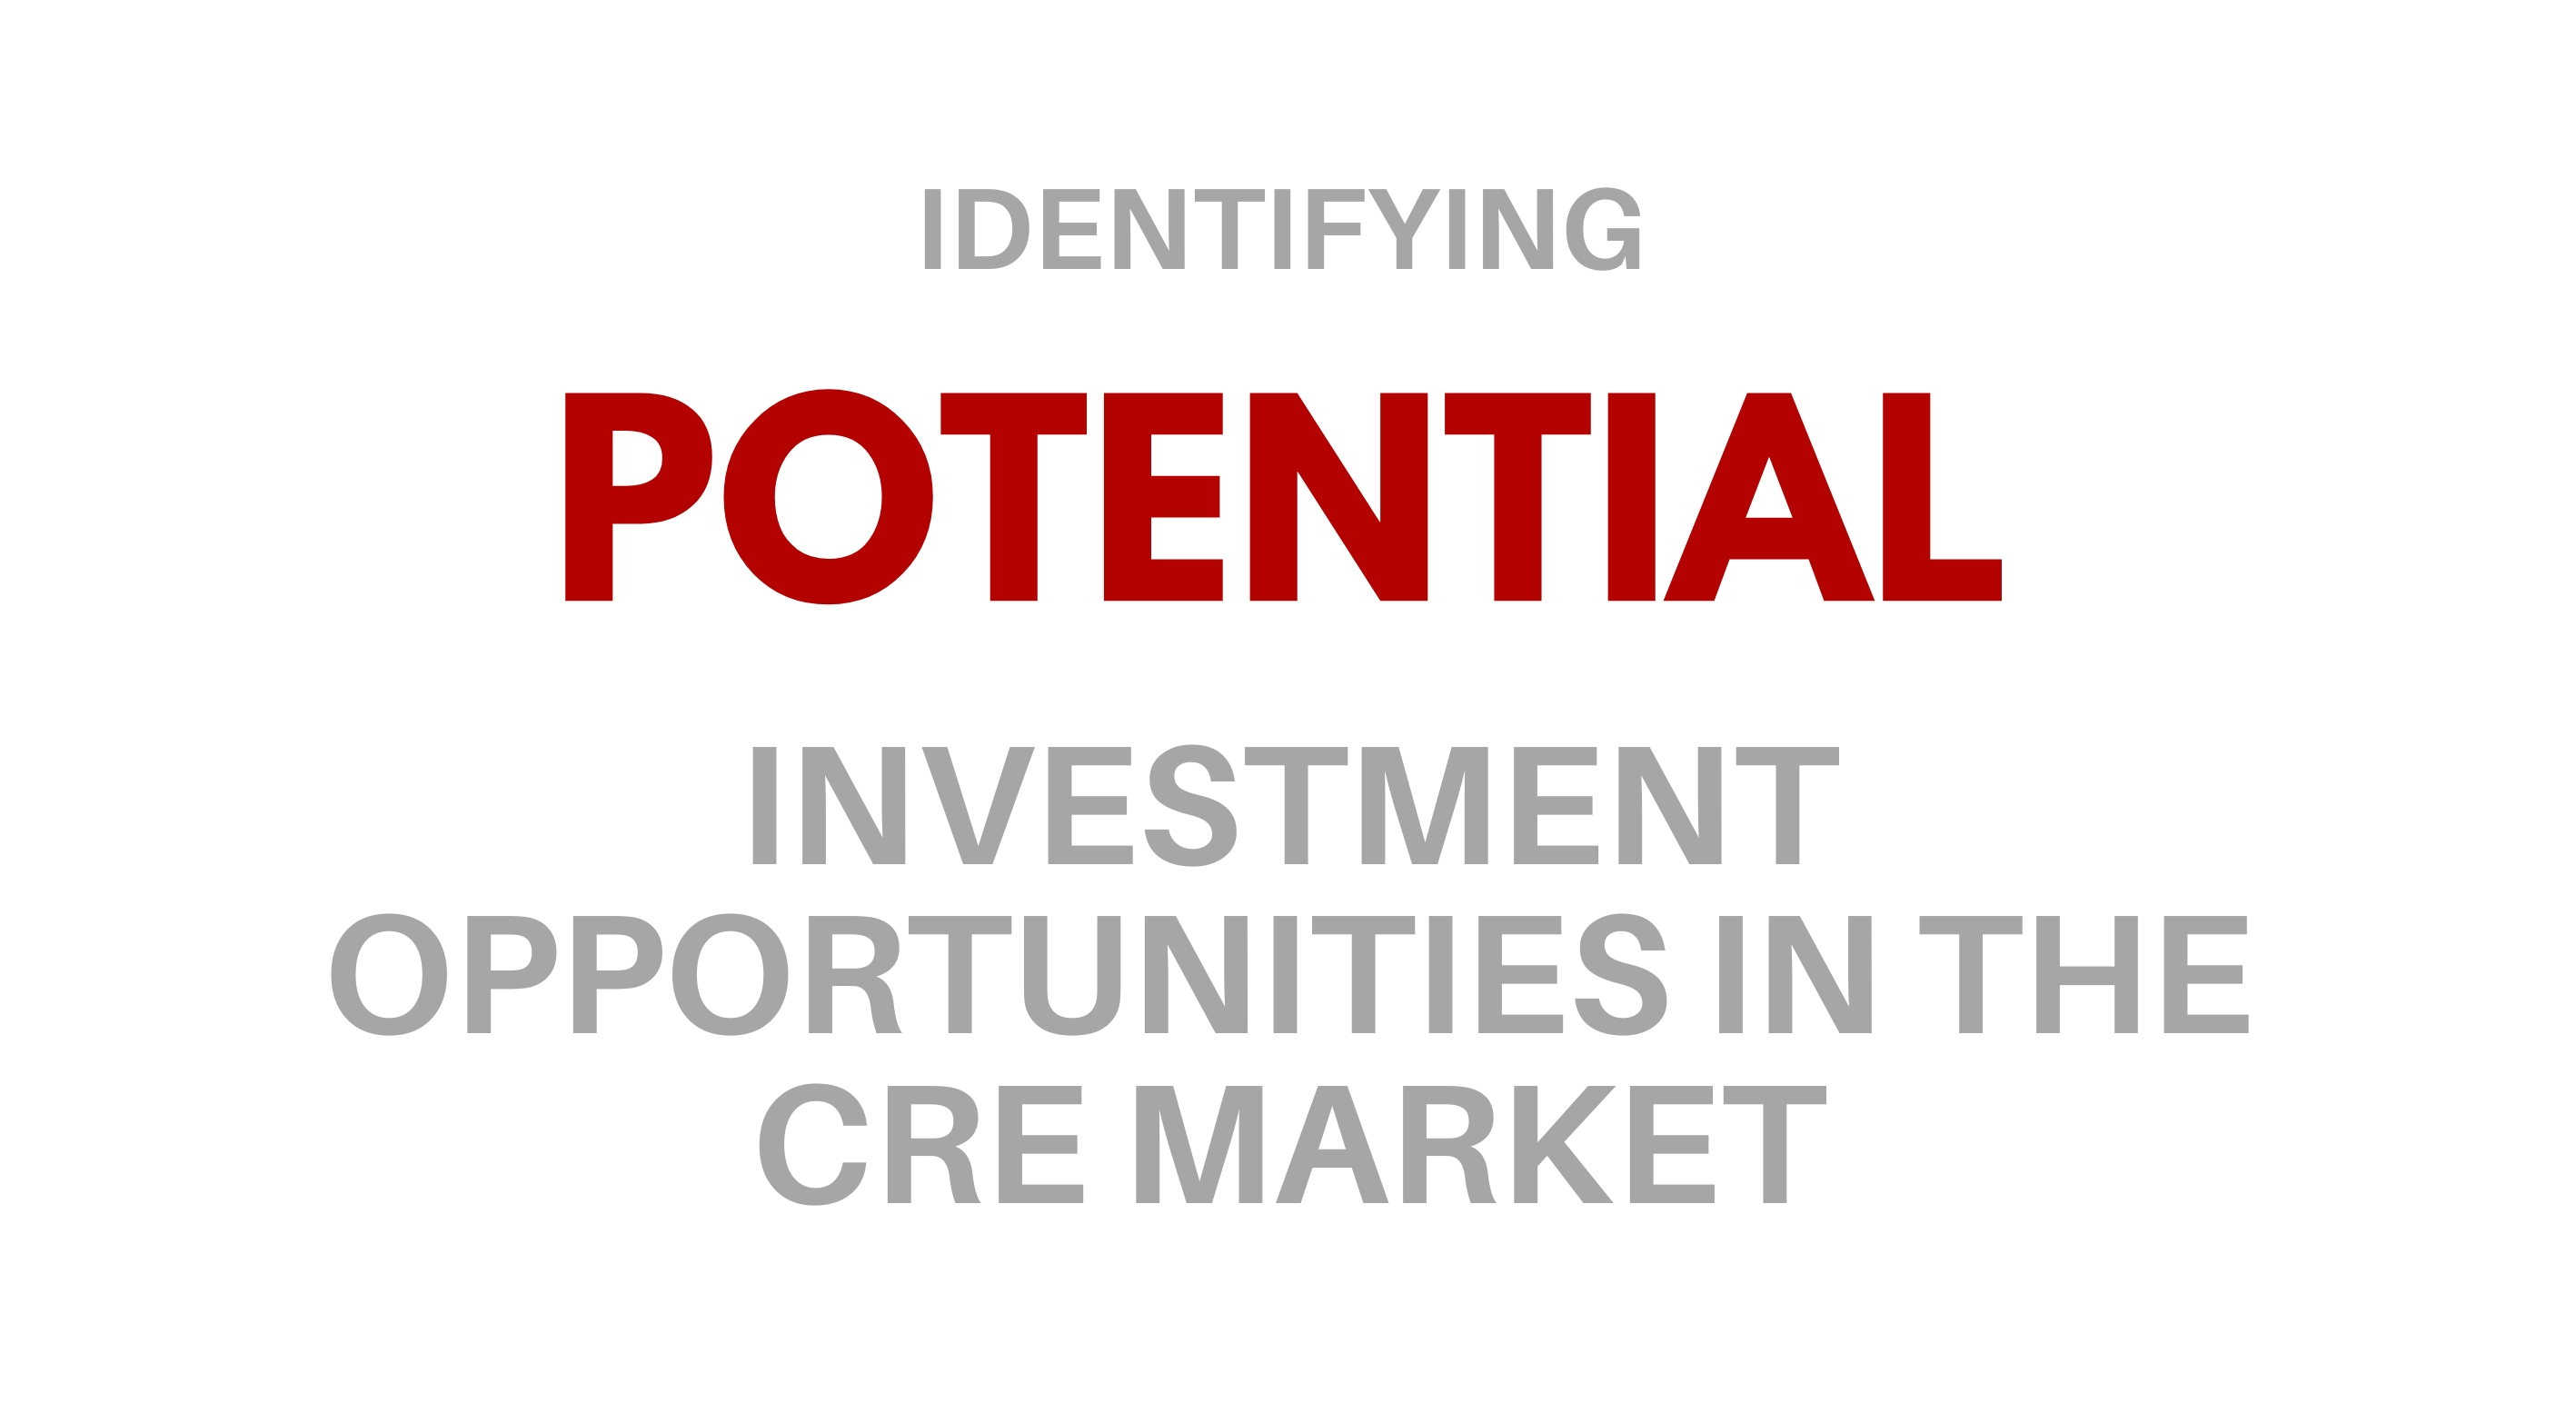 Identifying potential investment opportunities in the commercial real estate market